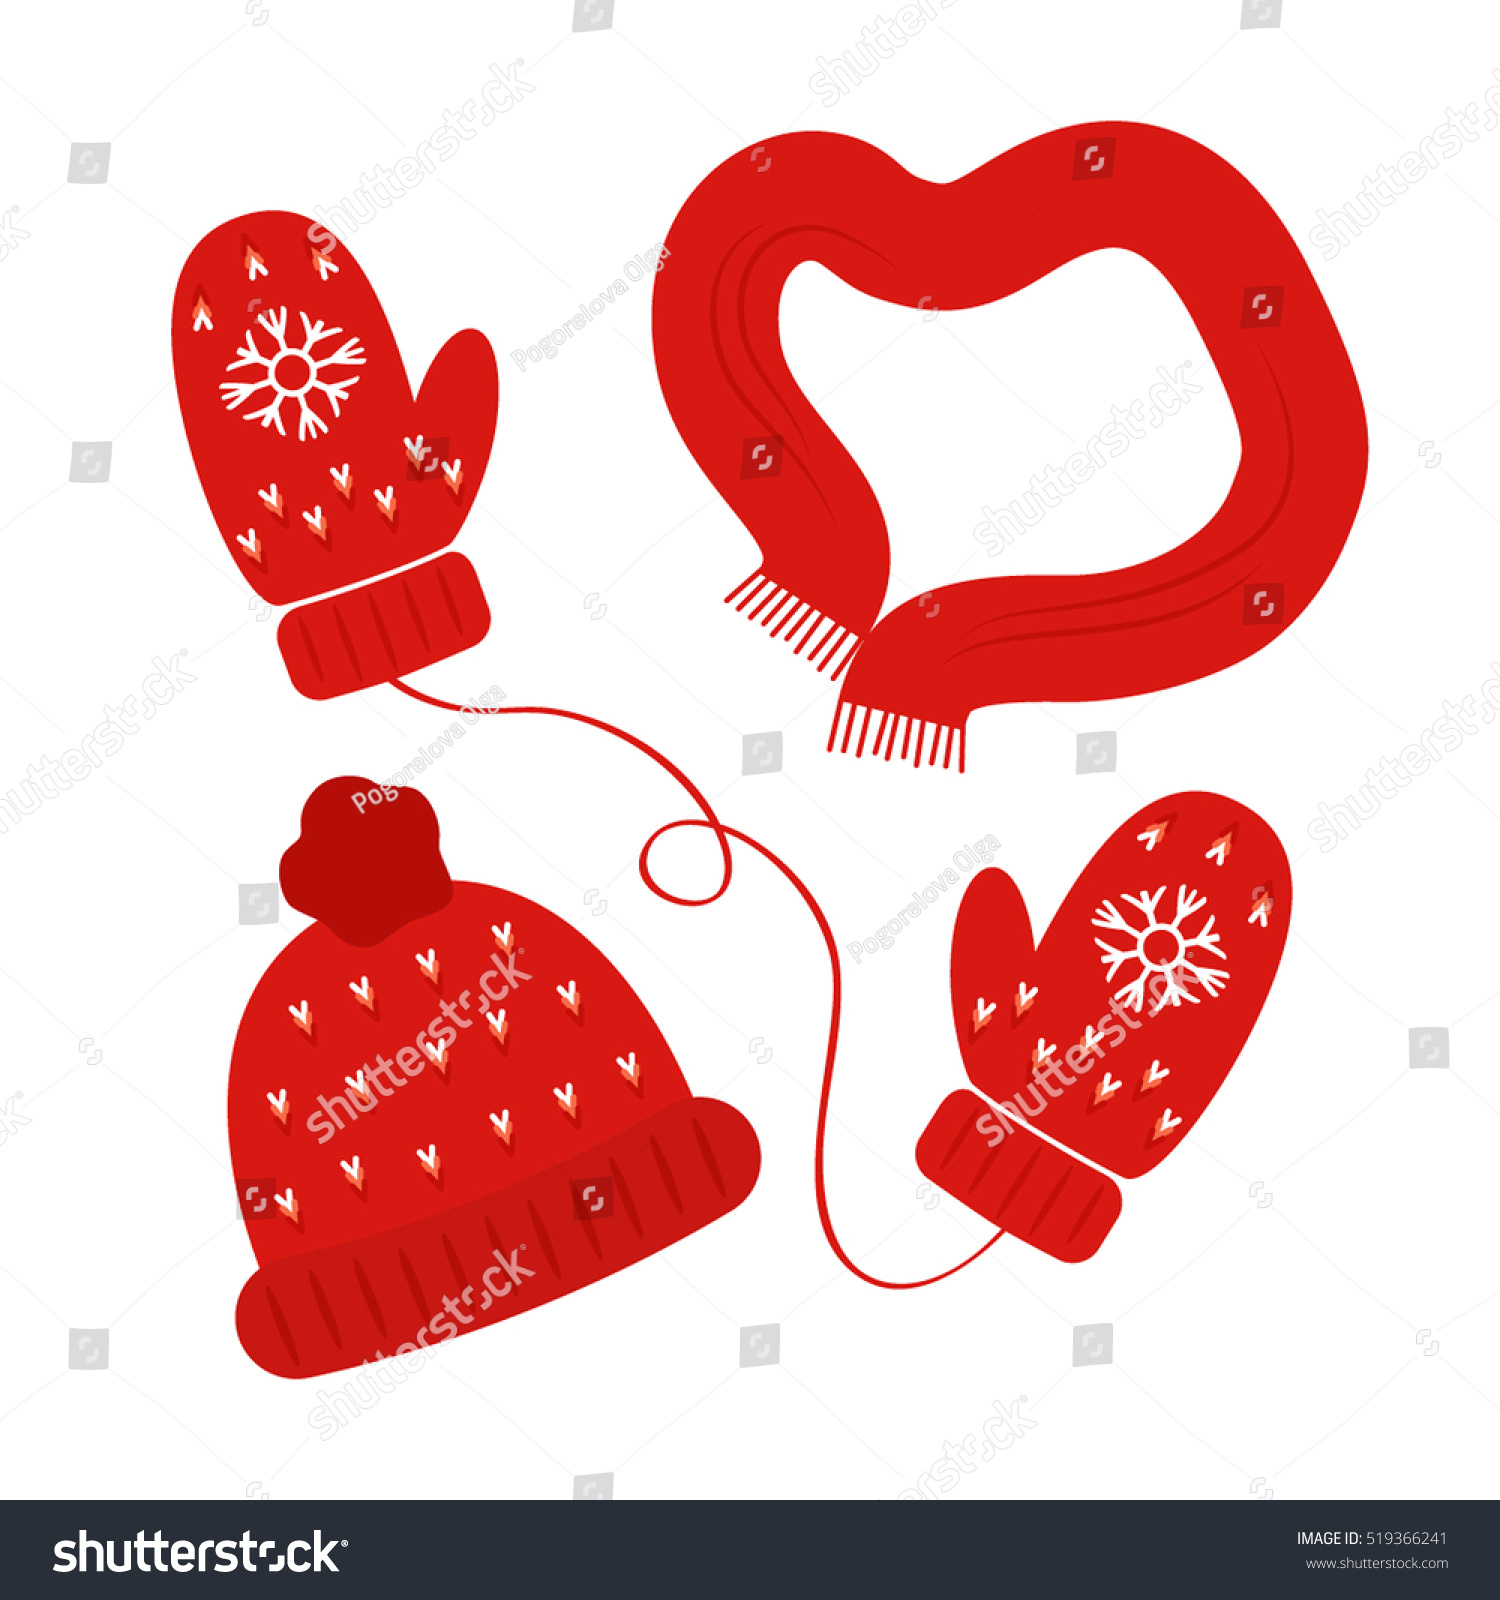 Set Knitted Winter  Wear Their Hat  Stock Vector 519366241 